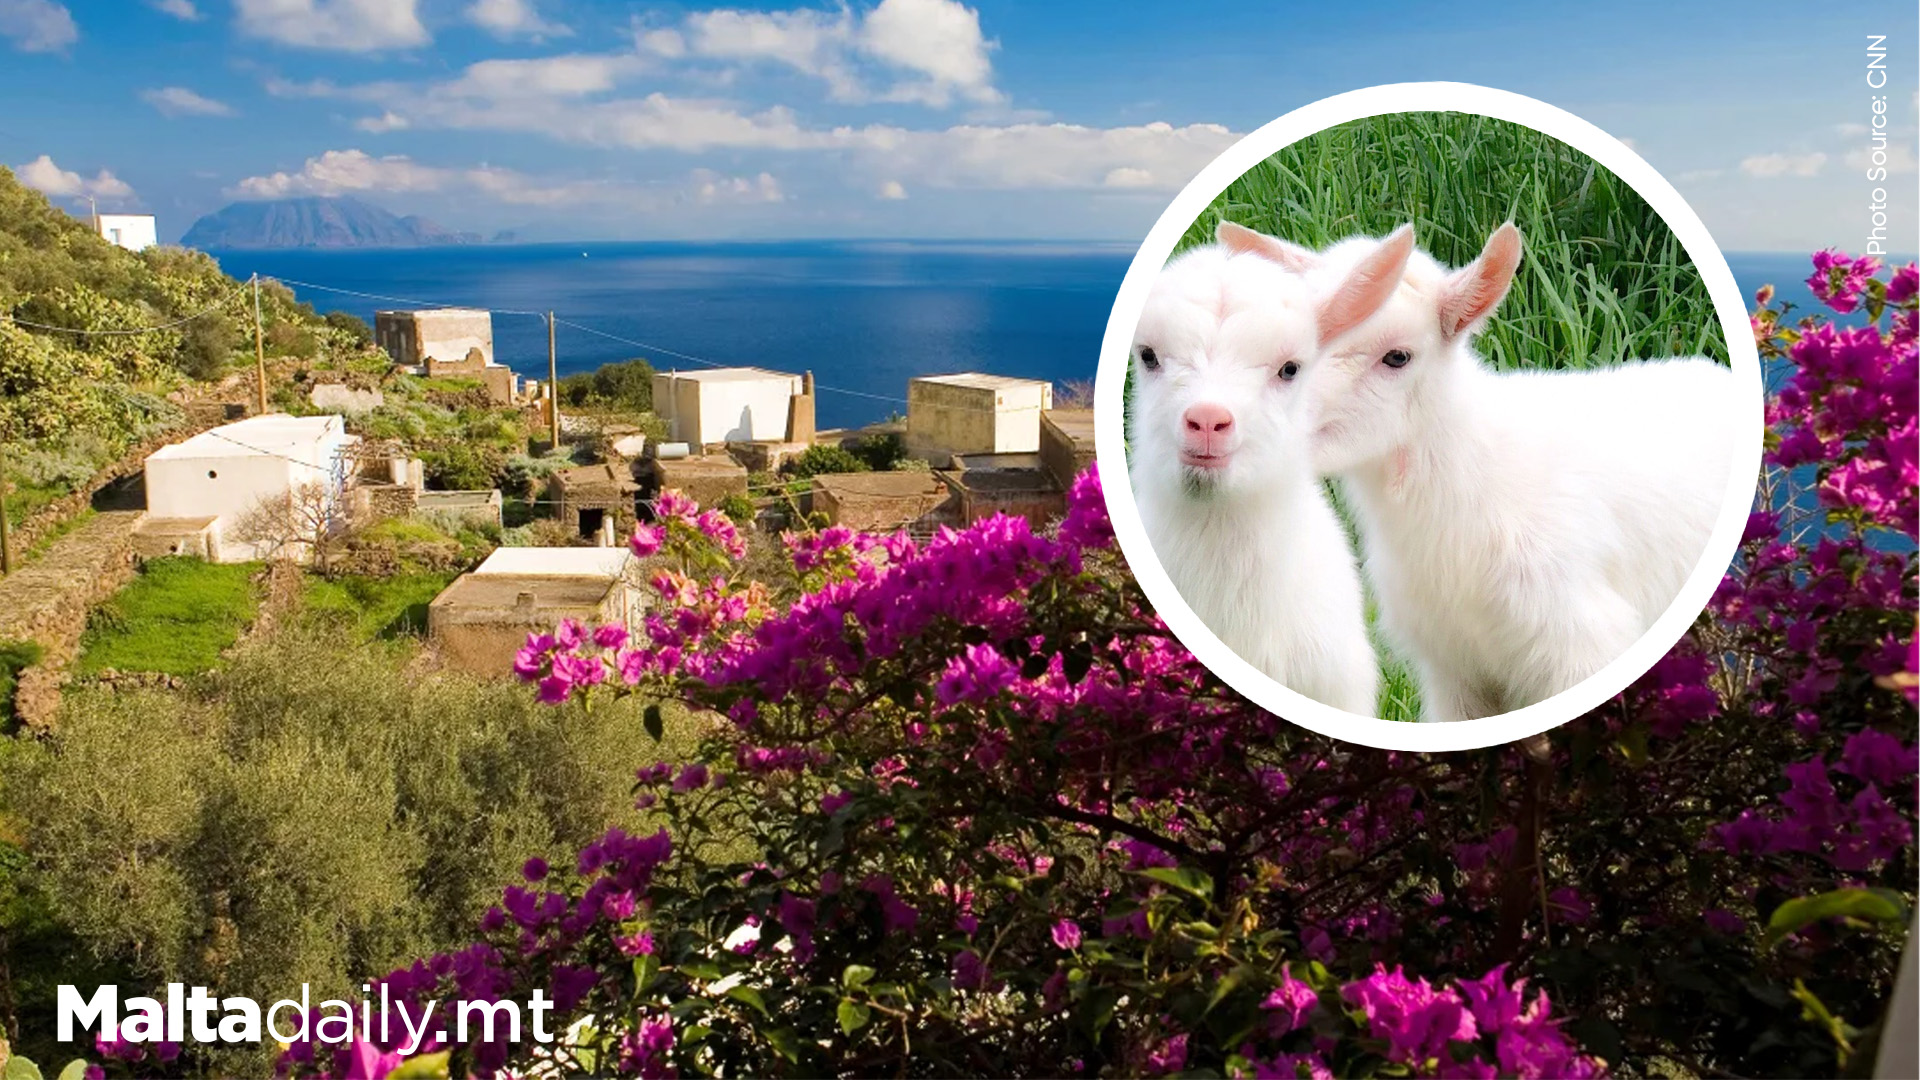 Mayor of Remote Sicilian Island Proposes 'Adopt-a-Goat' Fix for Wild Goat Influx